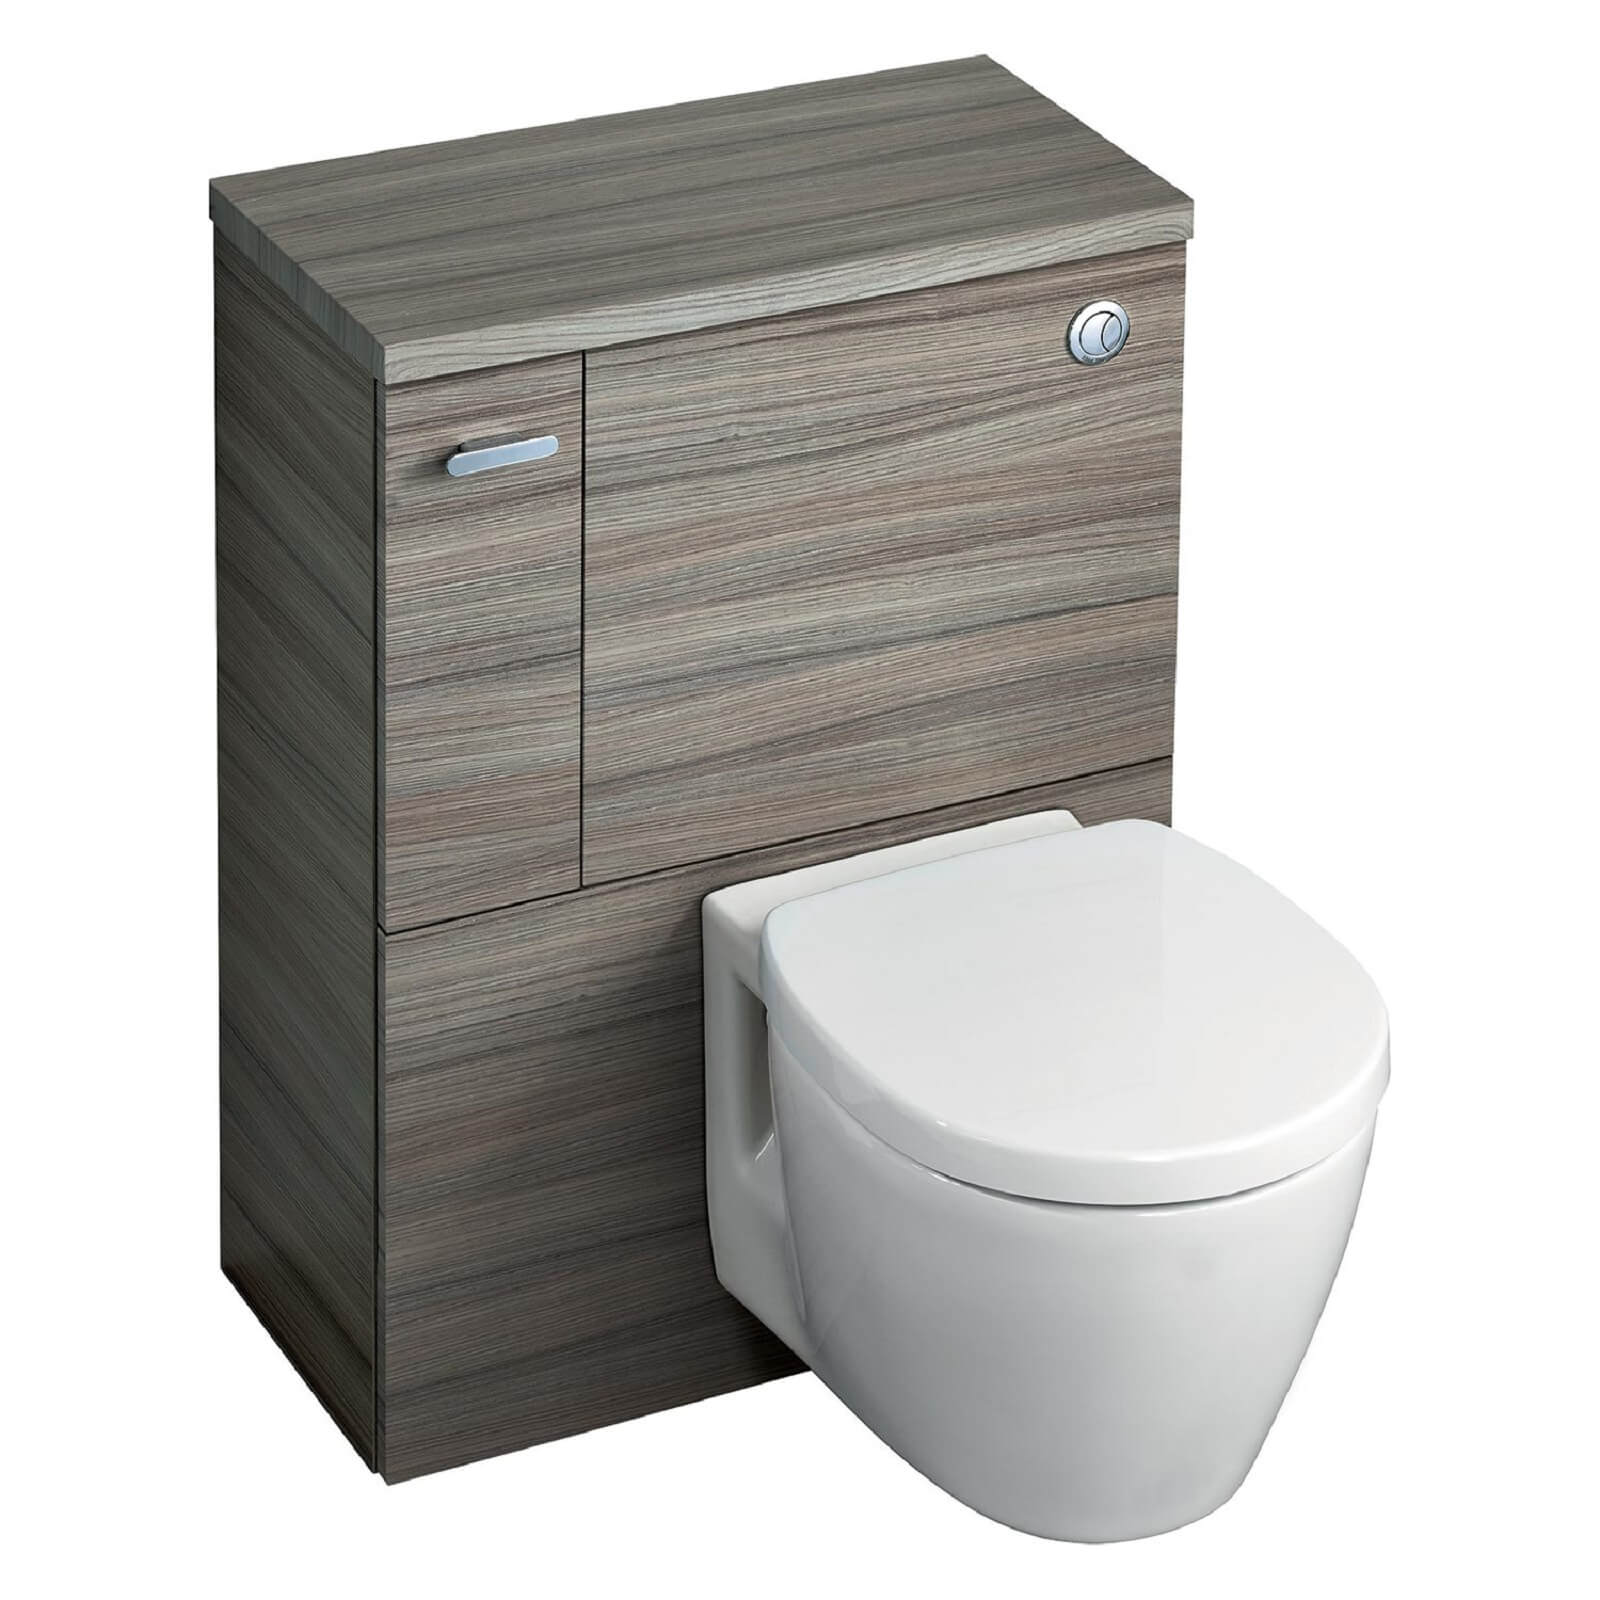 Ideal Standard Senses Space Back to Wall Toilet Unit Package - Dark Walnut